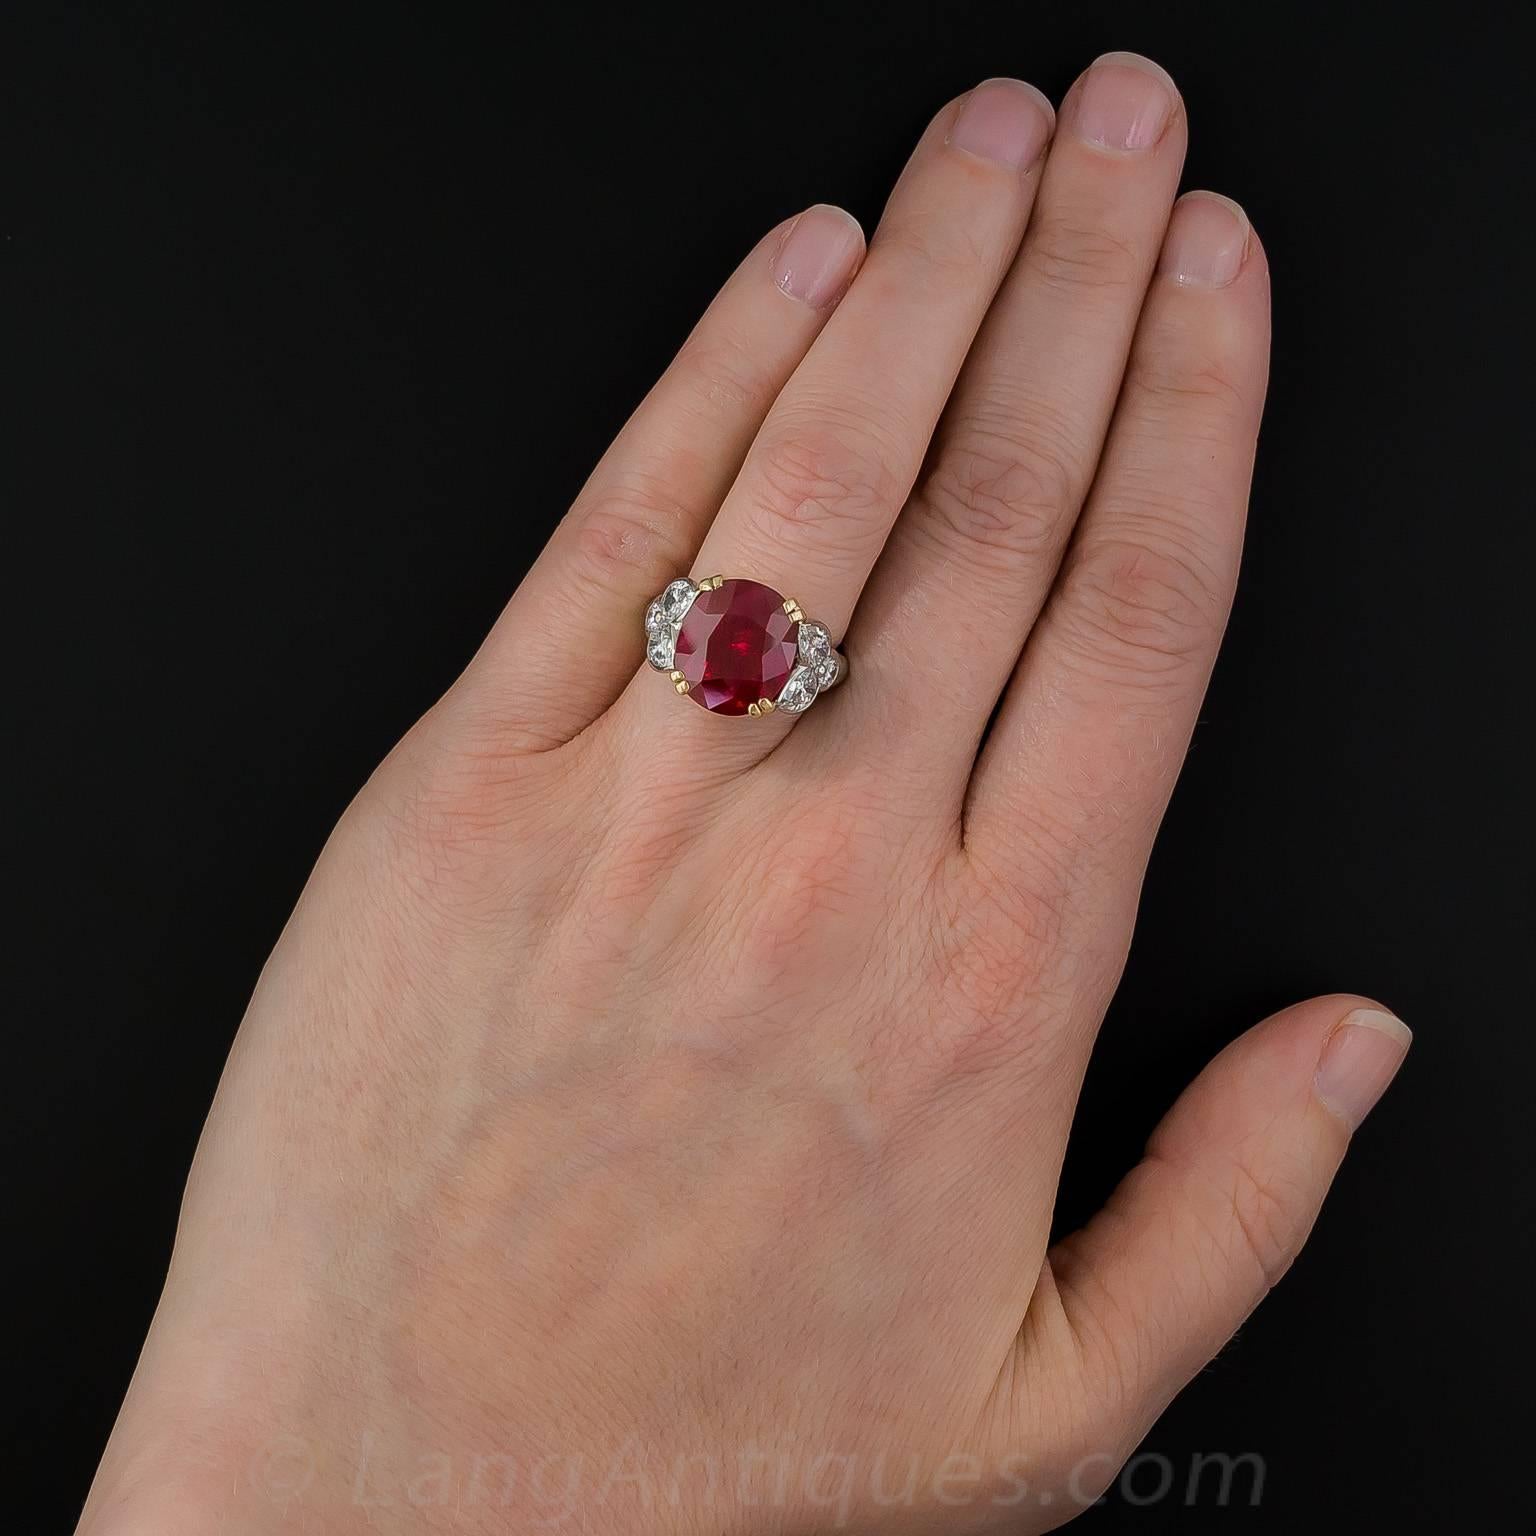 9.15 Carat GIA Certified Ruby Diamond Ring For Sale 3